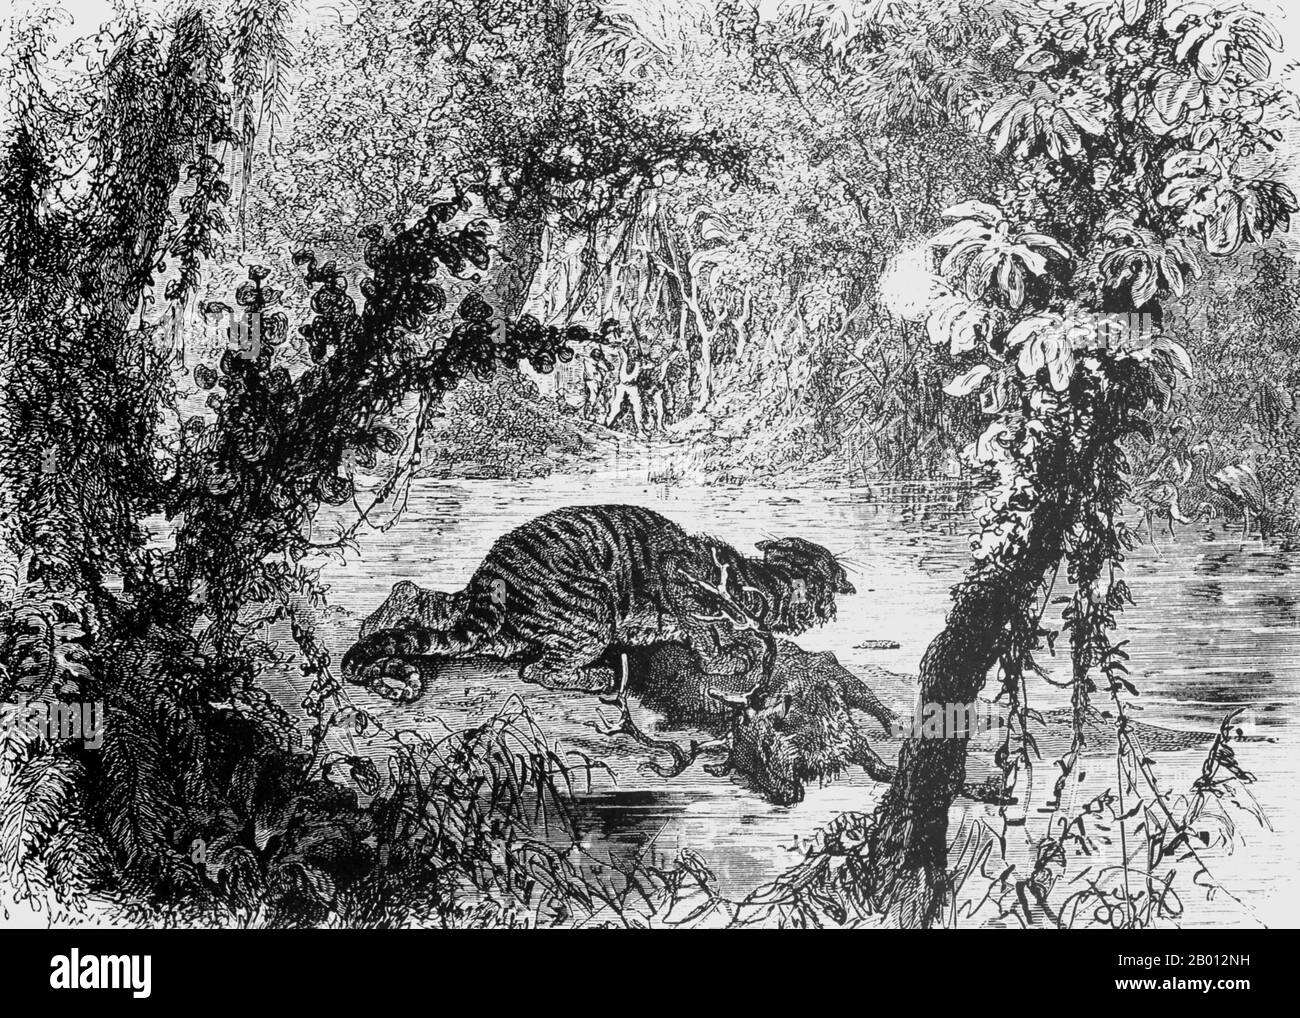 Cambodia: A sketch of a deer killed by a tiger in the jungle north of Siem Reap. Illustration by Alphonse-Marie-Adolphe de Neuville (1836-1885), 1867.  This drawing by A. de Neuville is based on an original by Louis Delaporte which was sketched during the French Mekong Exploration Commission's two-year venture (1866-68) into the jungles of Indochina. The deer was slain in front of their eyes by the tiger. The French colonialists fired off a couple of shots and drove the animal away, then cut off the stag's hindquarters and carried it to Siem Reap where the meat was salted. Stock Photo